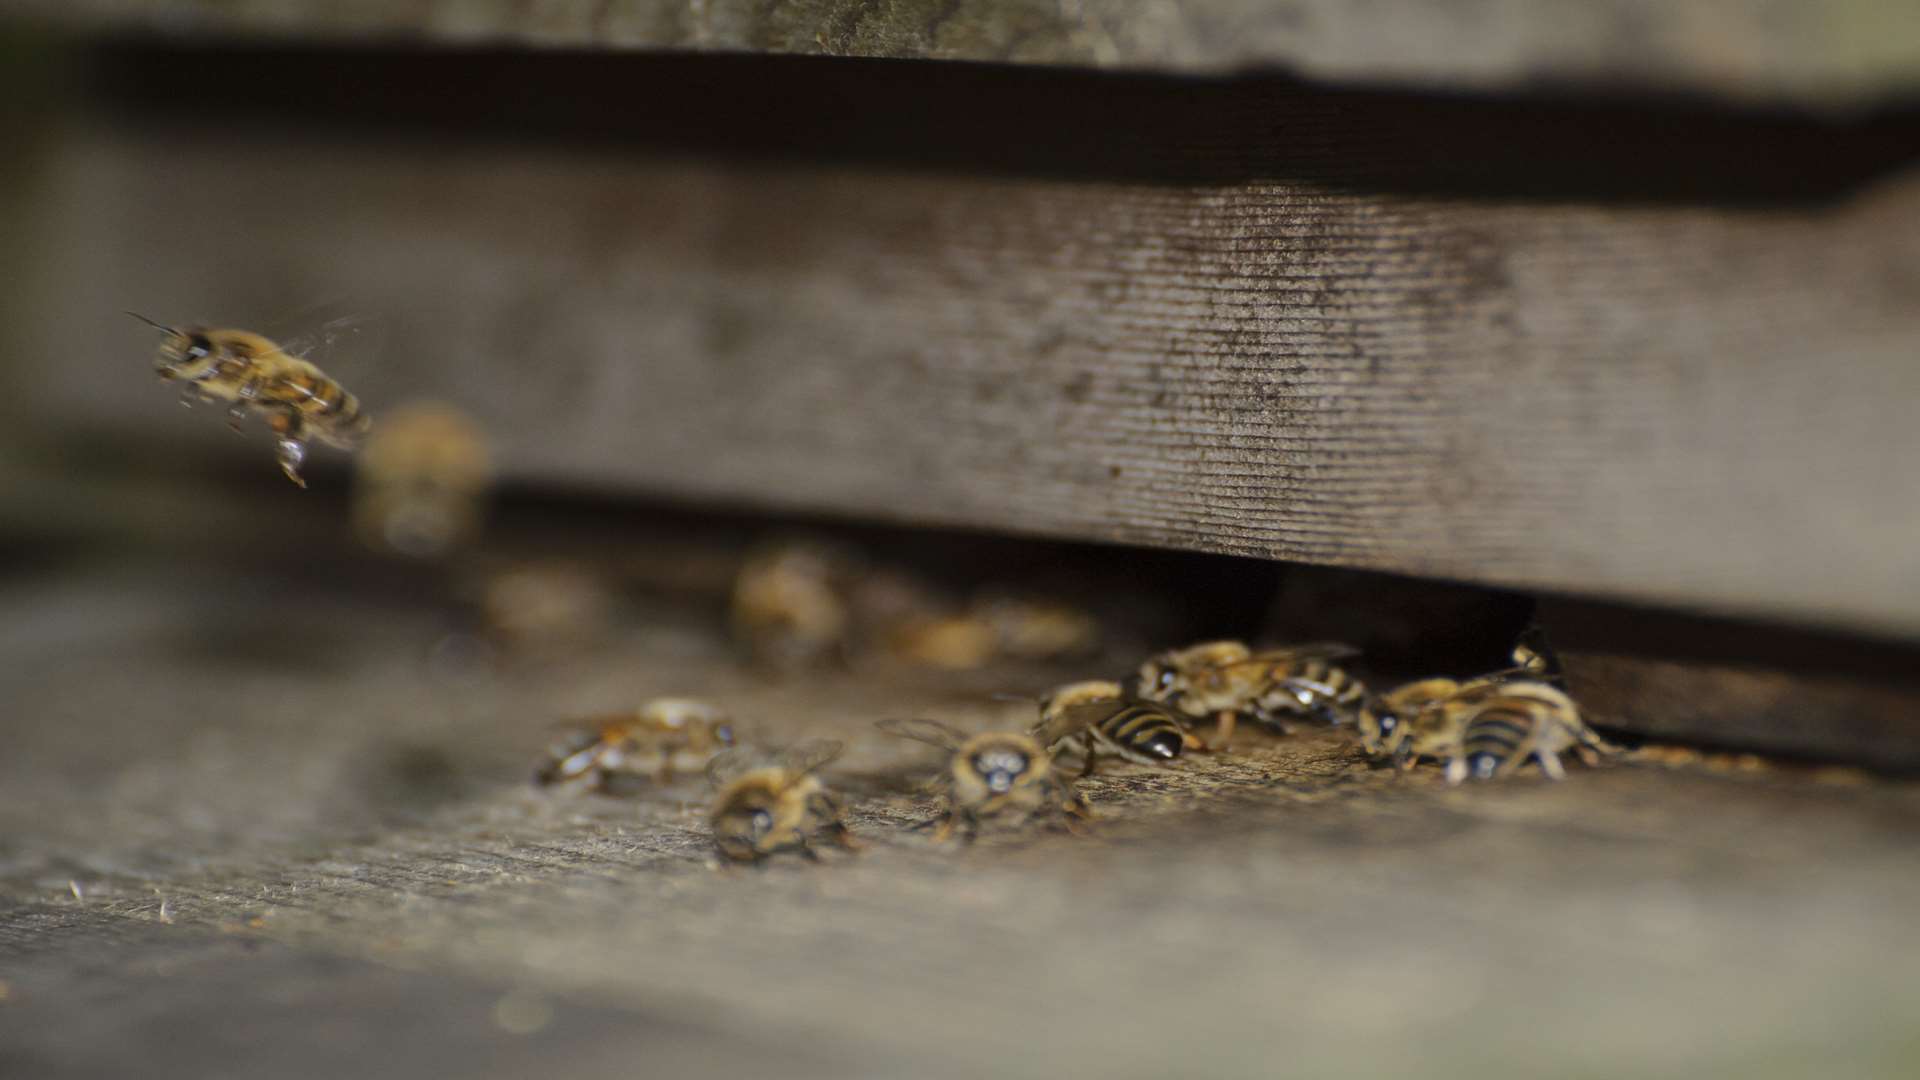 Bees around the entrance to a hive.